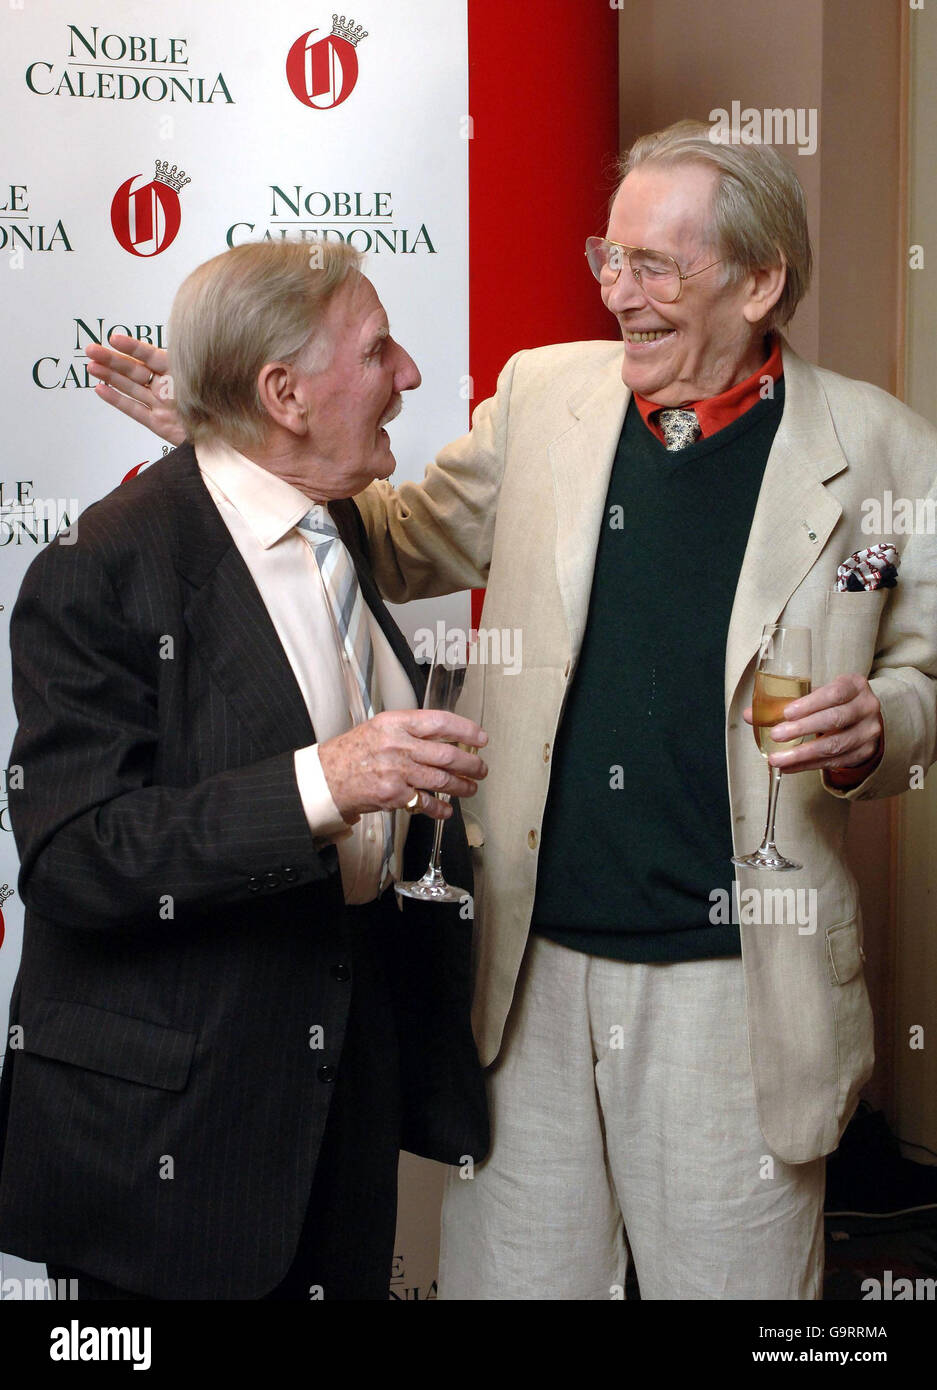 Peter O'Toole (right) congratulates Leslie Phillips on winning the 'Trouper of the Year Award', at The Oldie Magazine's 'Oldie of the Year Awards' in Simpsons hotel, central London. Stock Photo